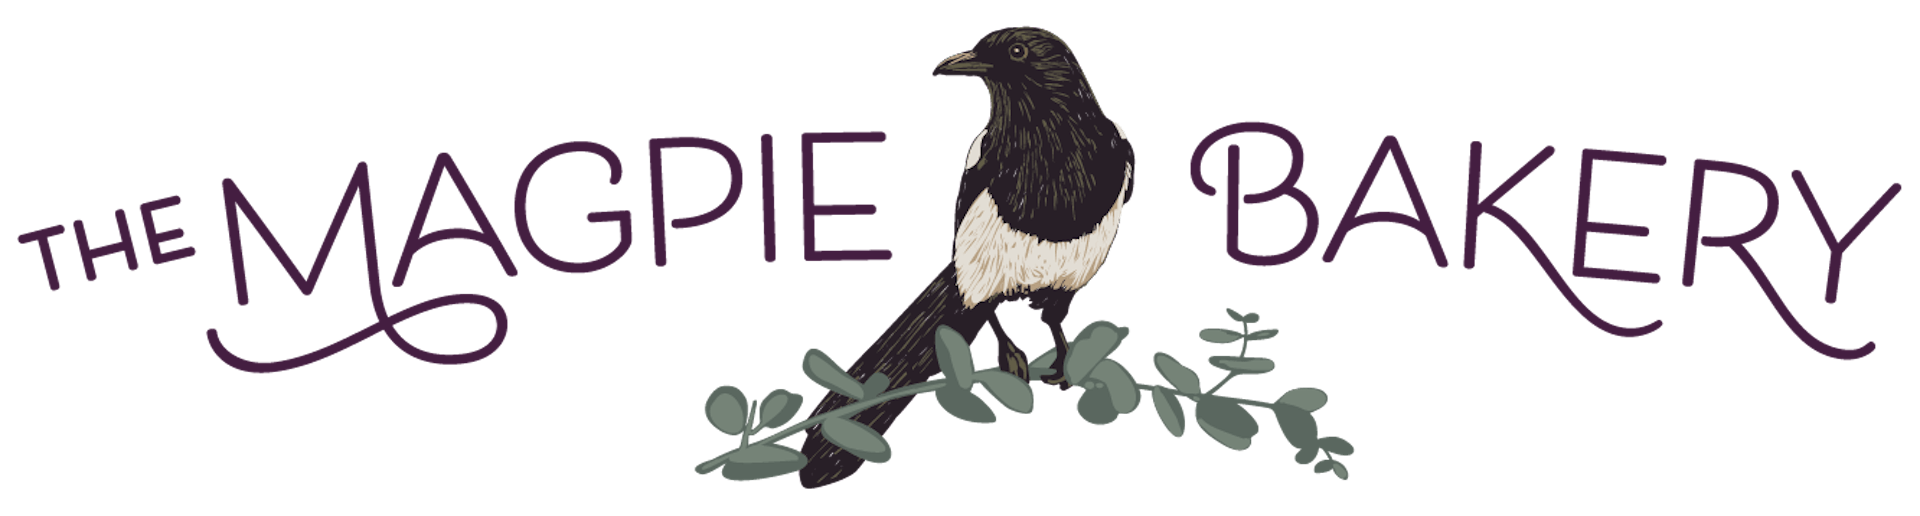 The Magpie Bakery